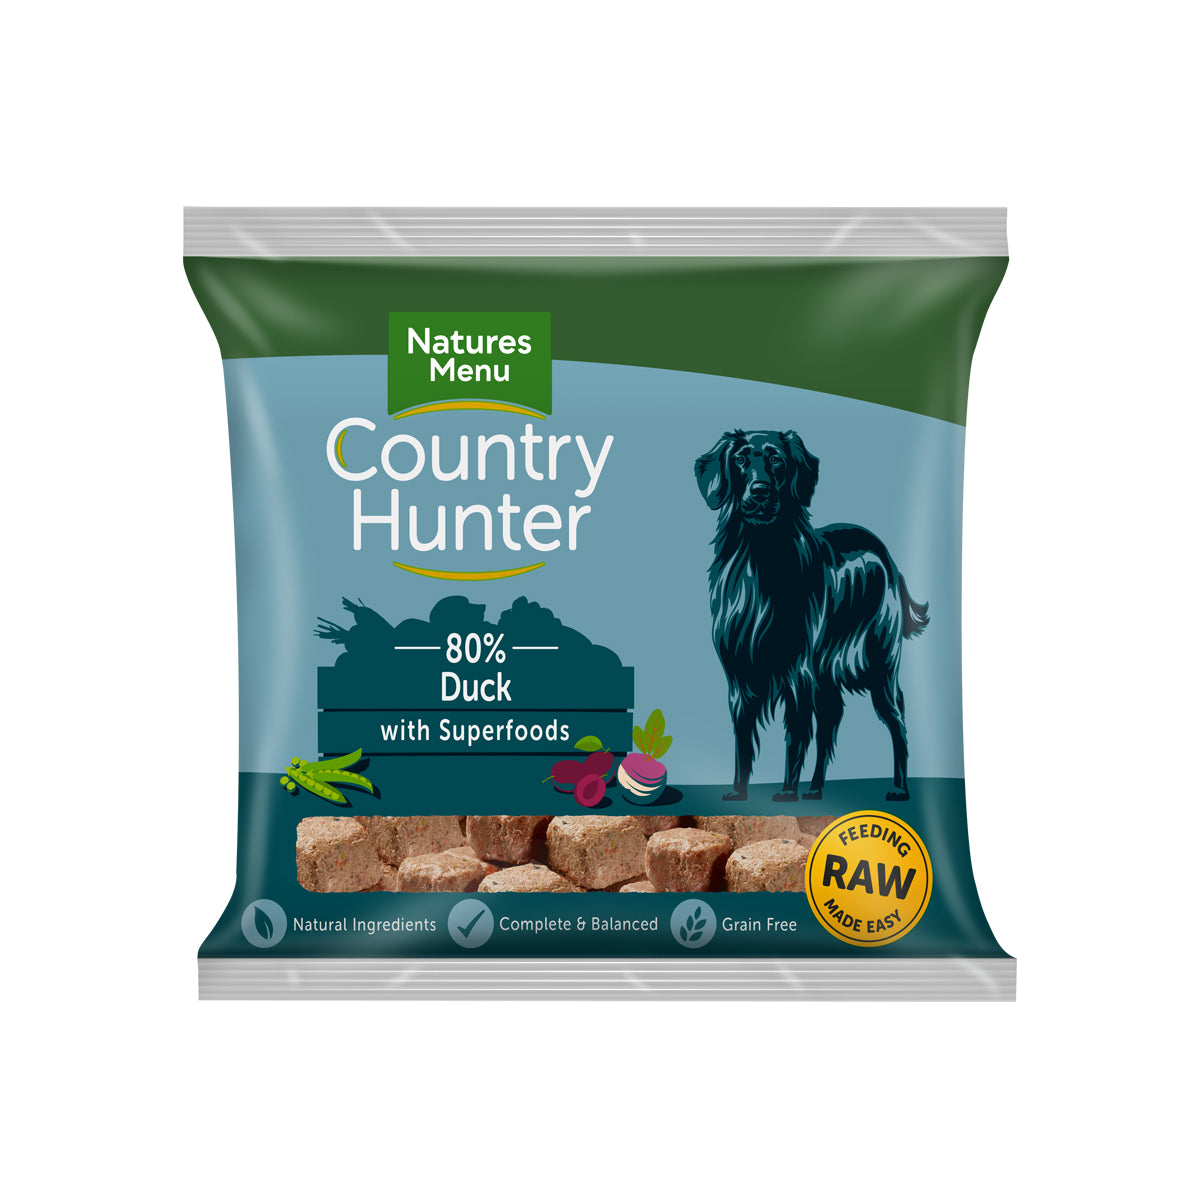 Natures Menu Country Hunter Raw Nuggets Succulent Duck For Dogs 1kg